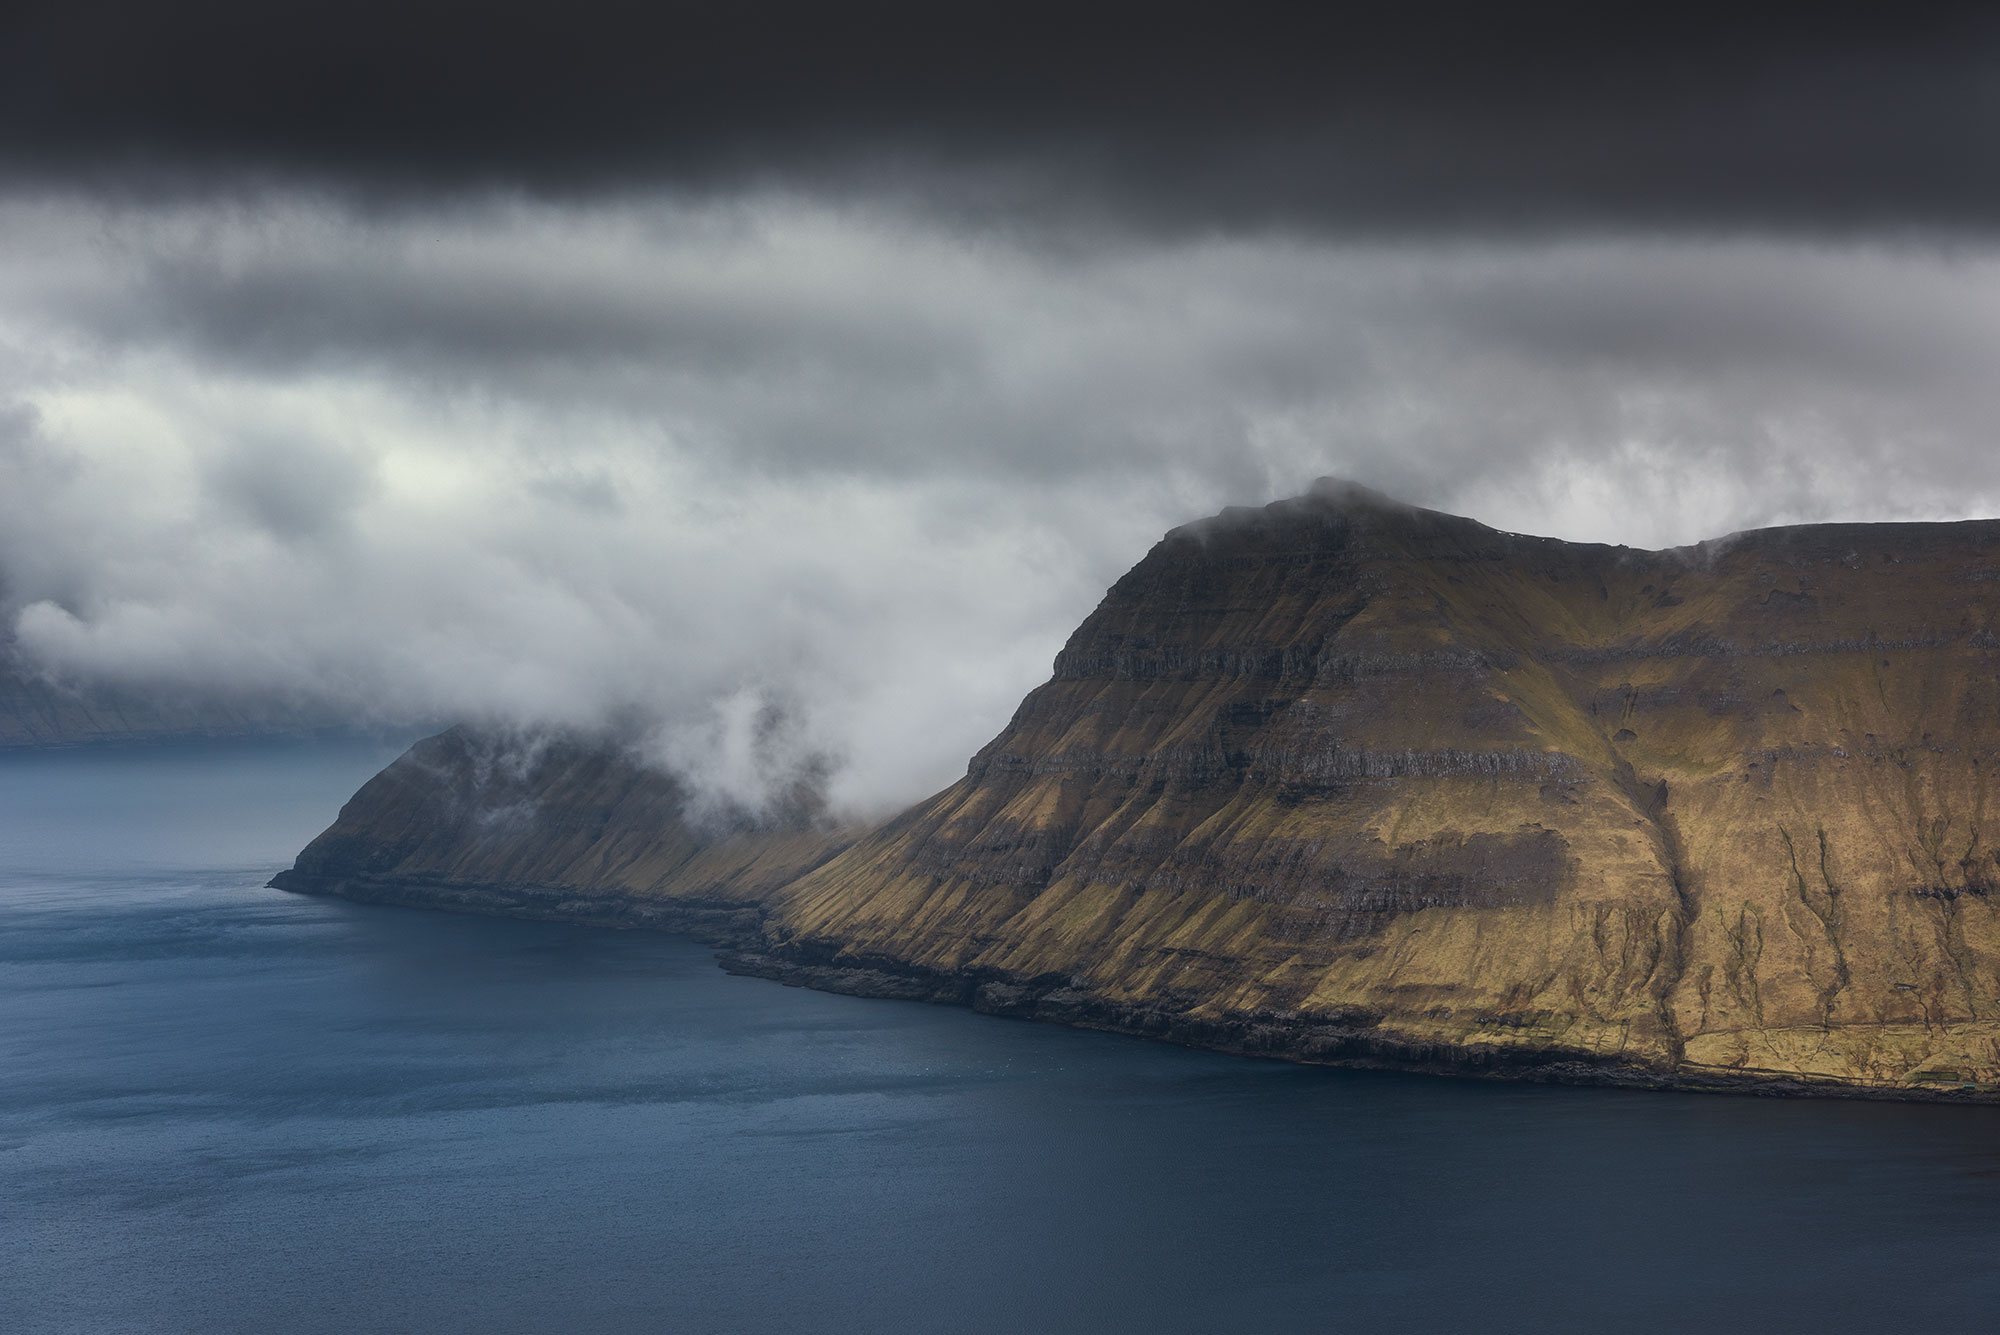 Explore the mesmerizing beauty of the Faroe Islands with this captivating landscape photograph captured by Swiss photographer Jennifer Esseiva. Behold the dramatic and cloudy vista that stretches across the rugged terrain of the Faroe Islands, inviting viewers to immerse themselves in its raw natural beauty. This striking image captures the essence of the island's dramatic landscapes, showcasing nature's awe-inspiring power. Experience the magic of Faroese scenery through Jennifer Esseiva's lens, where every frame tells a story of adventure and exploration. Discover the timeless allure of the Faroe Islands in this evocative landscape photograph.